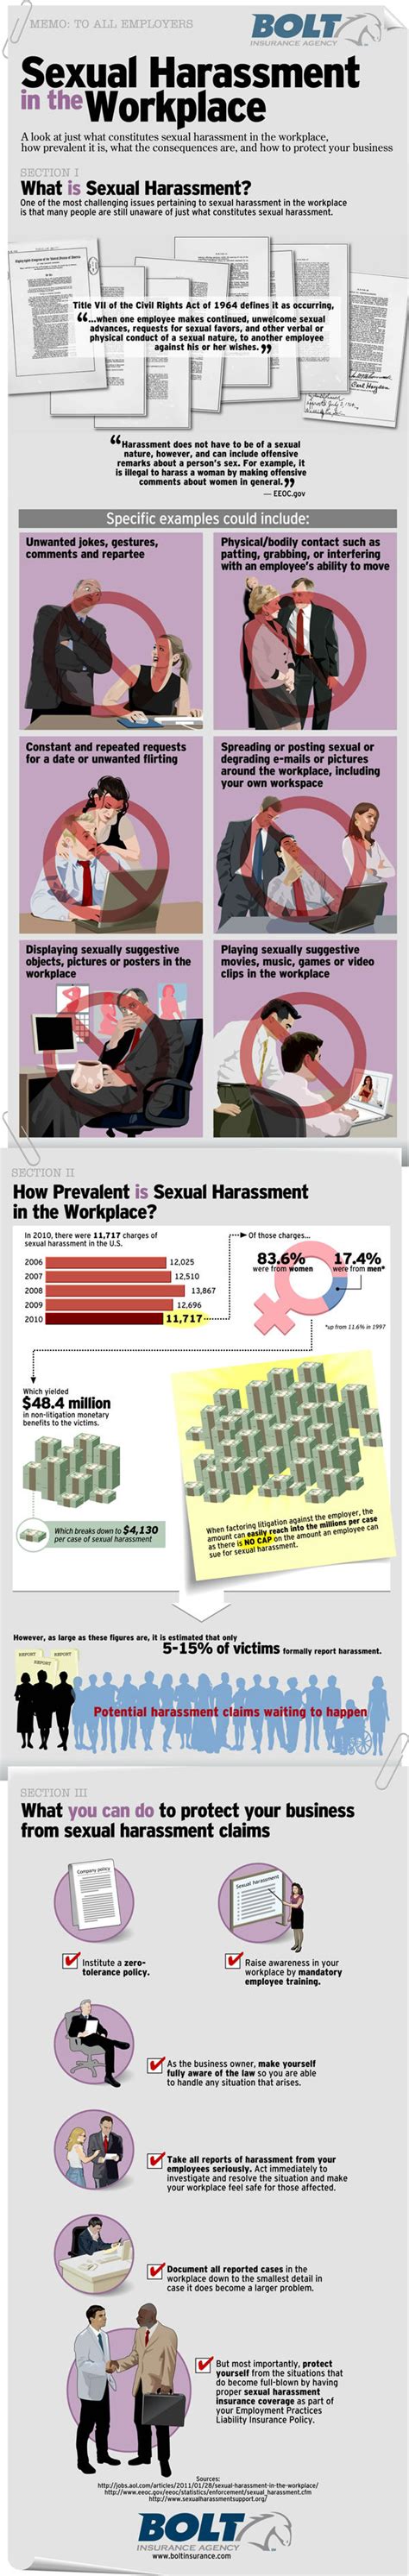 sexual harassment in the workplace [infographic] confessions of the